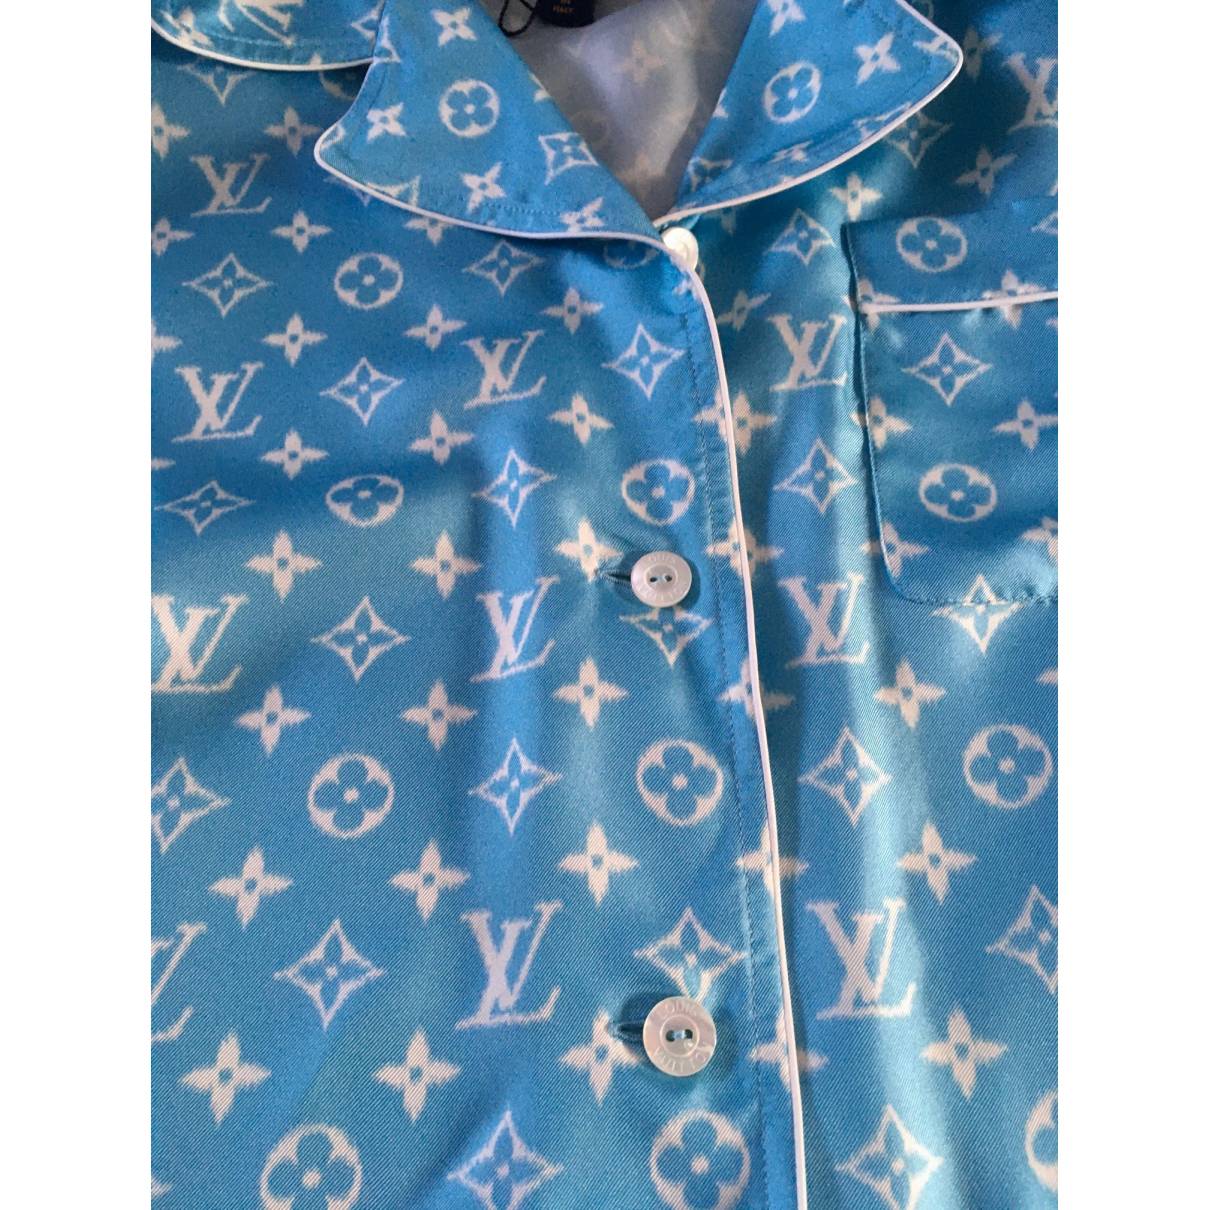 Louis Vuitton - Authenticated Top - Silk Blue For Woman, Never Worn, with Tag